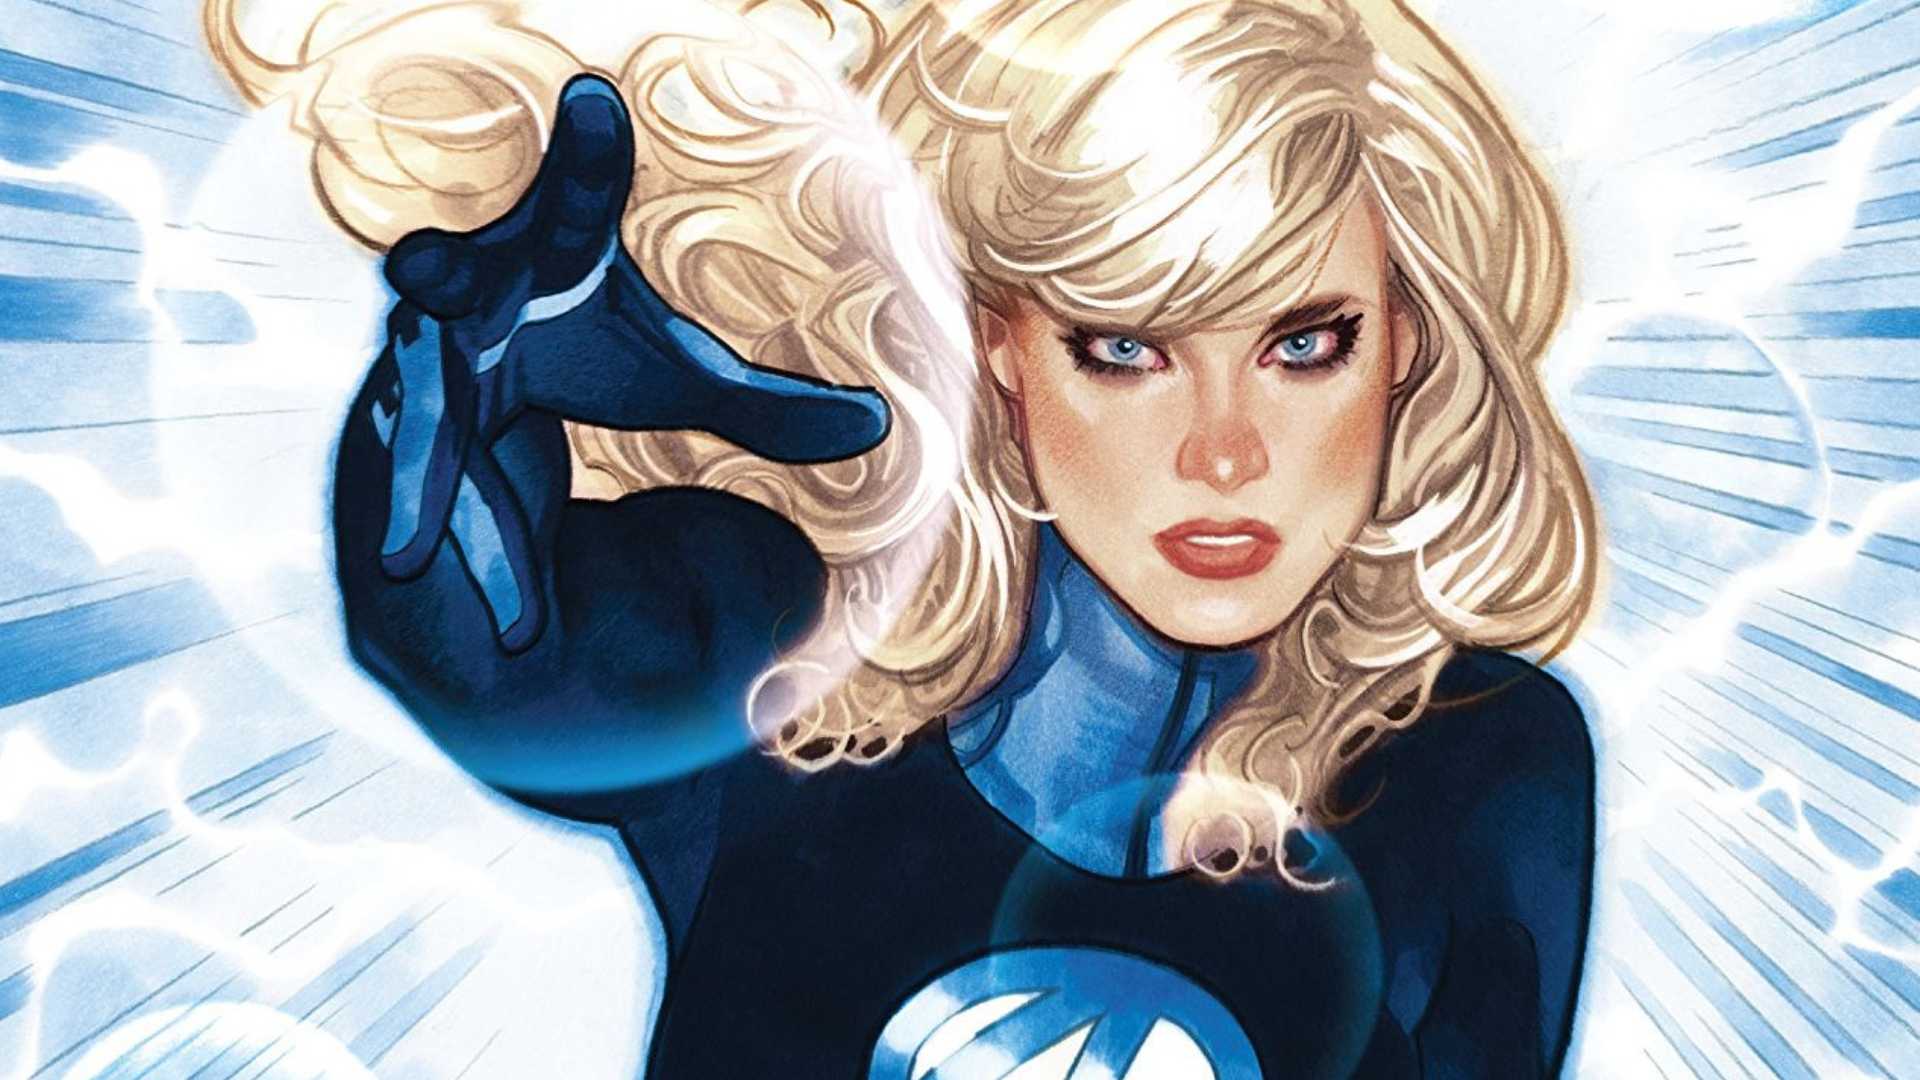 Fantastic Four latest casting rumors suggest that Marvel is considering Lily James And Jodie Comer for the role of Sue Storm